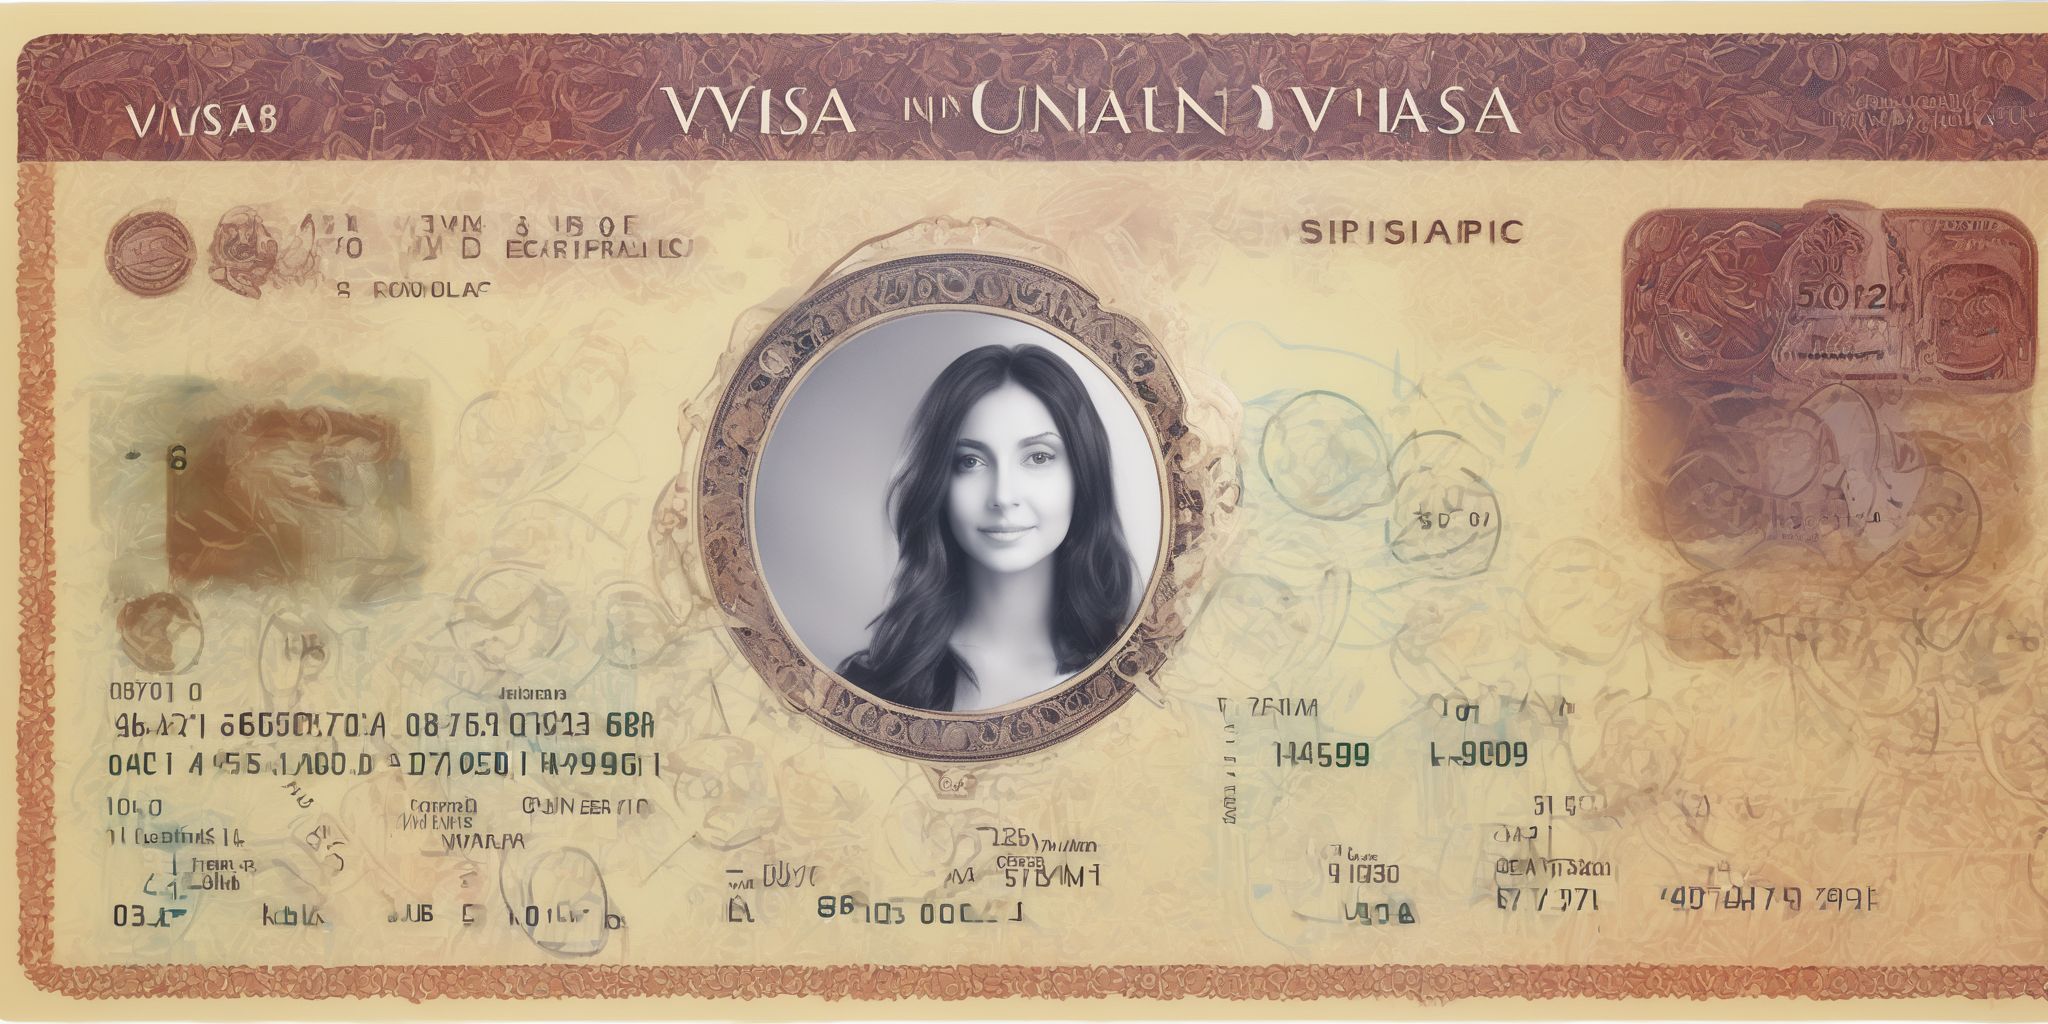 Visa  in realistic, photographic style